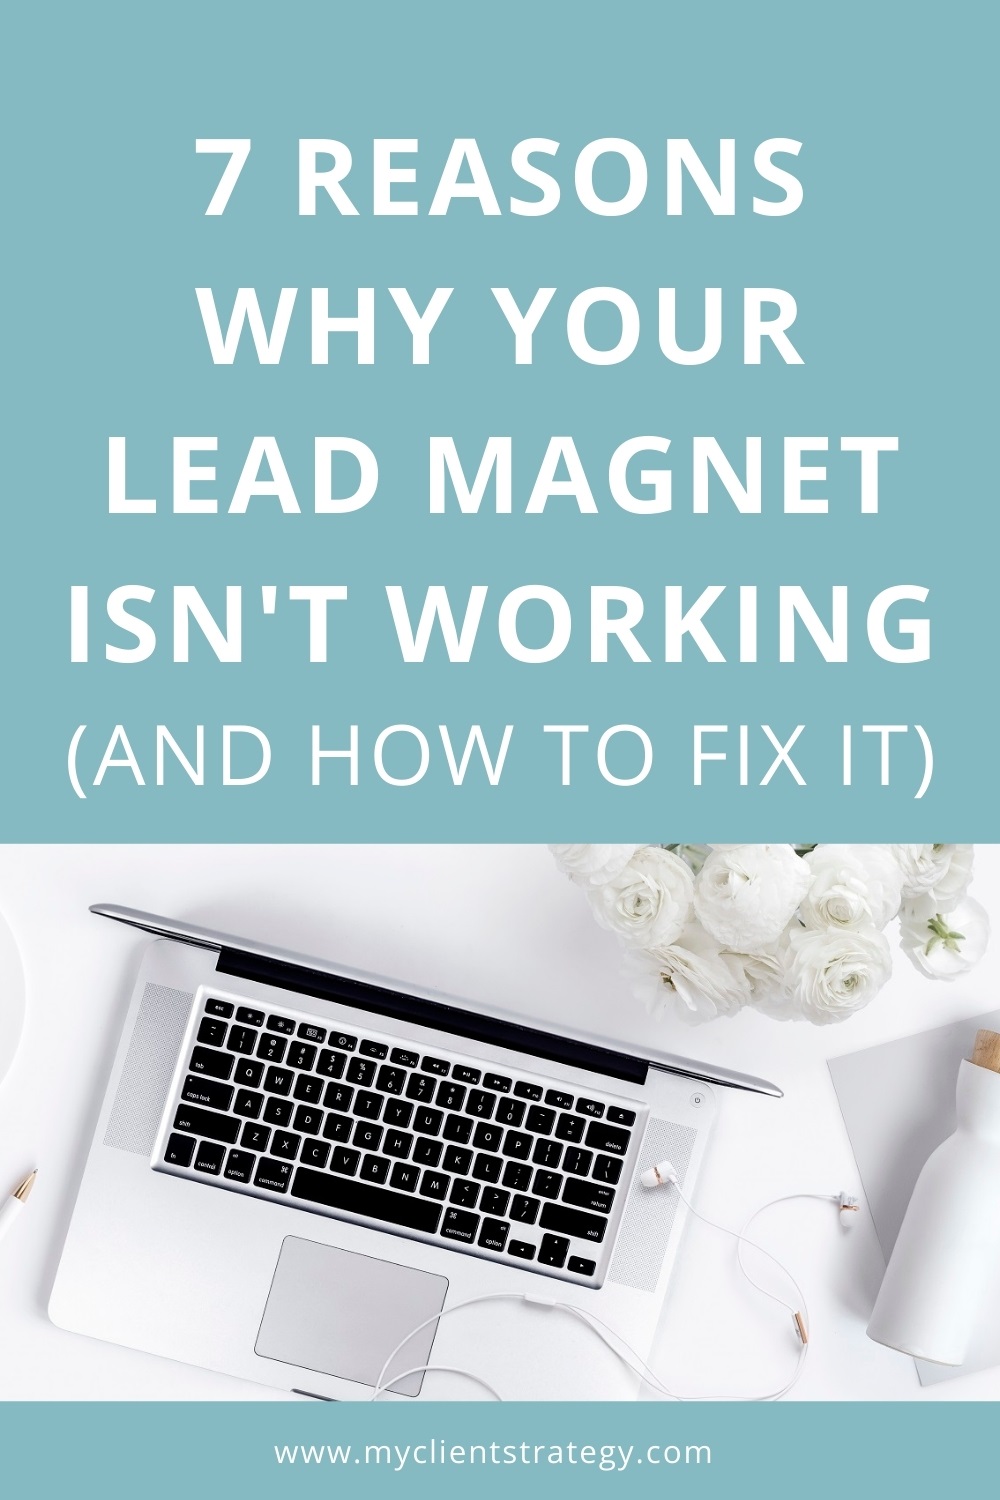 7 reasons why your lead magnet isn’t working